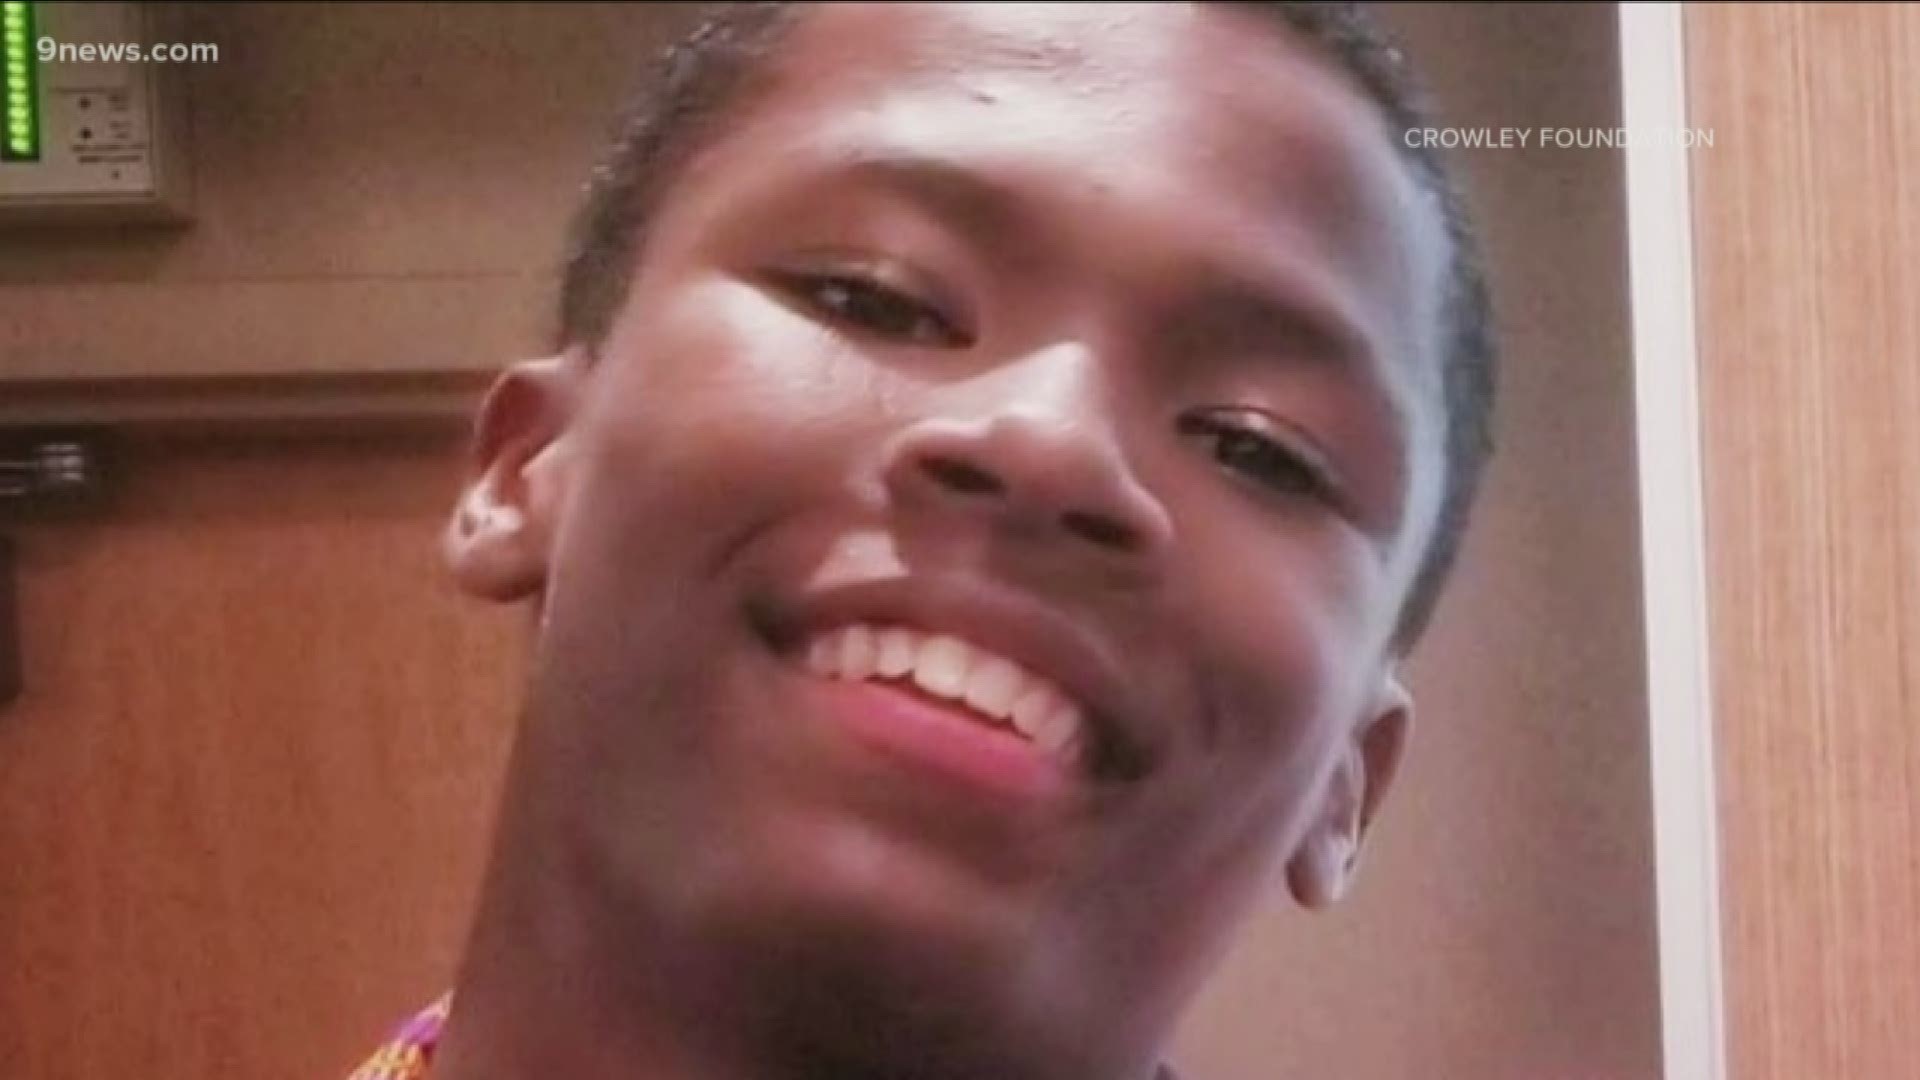 17-year-old Nathan Poindexter was shot inside the JC Penney at Town Center at Aurora Friday afternoon.